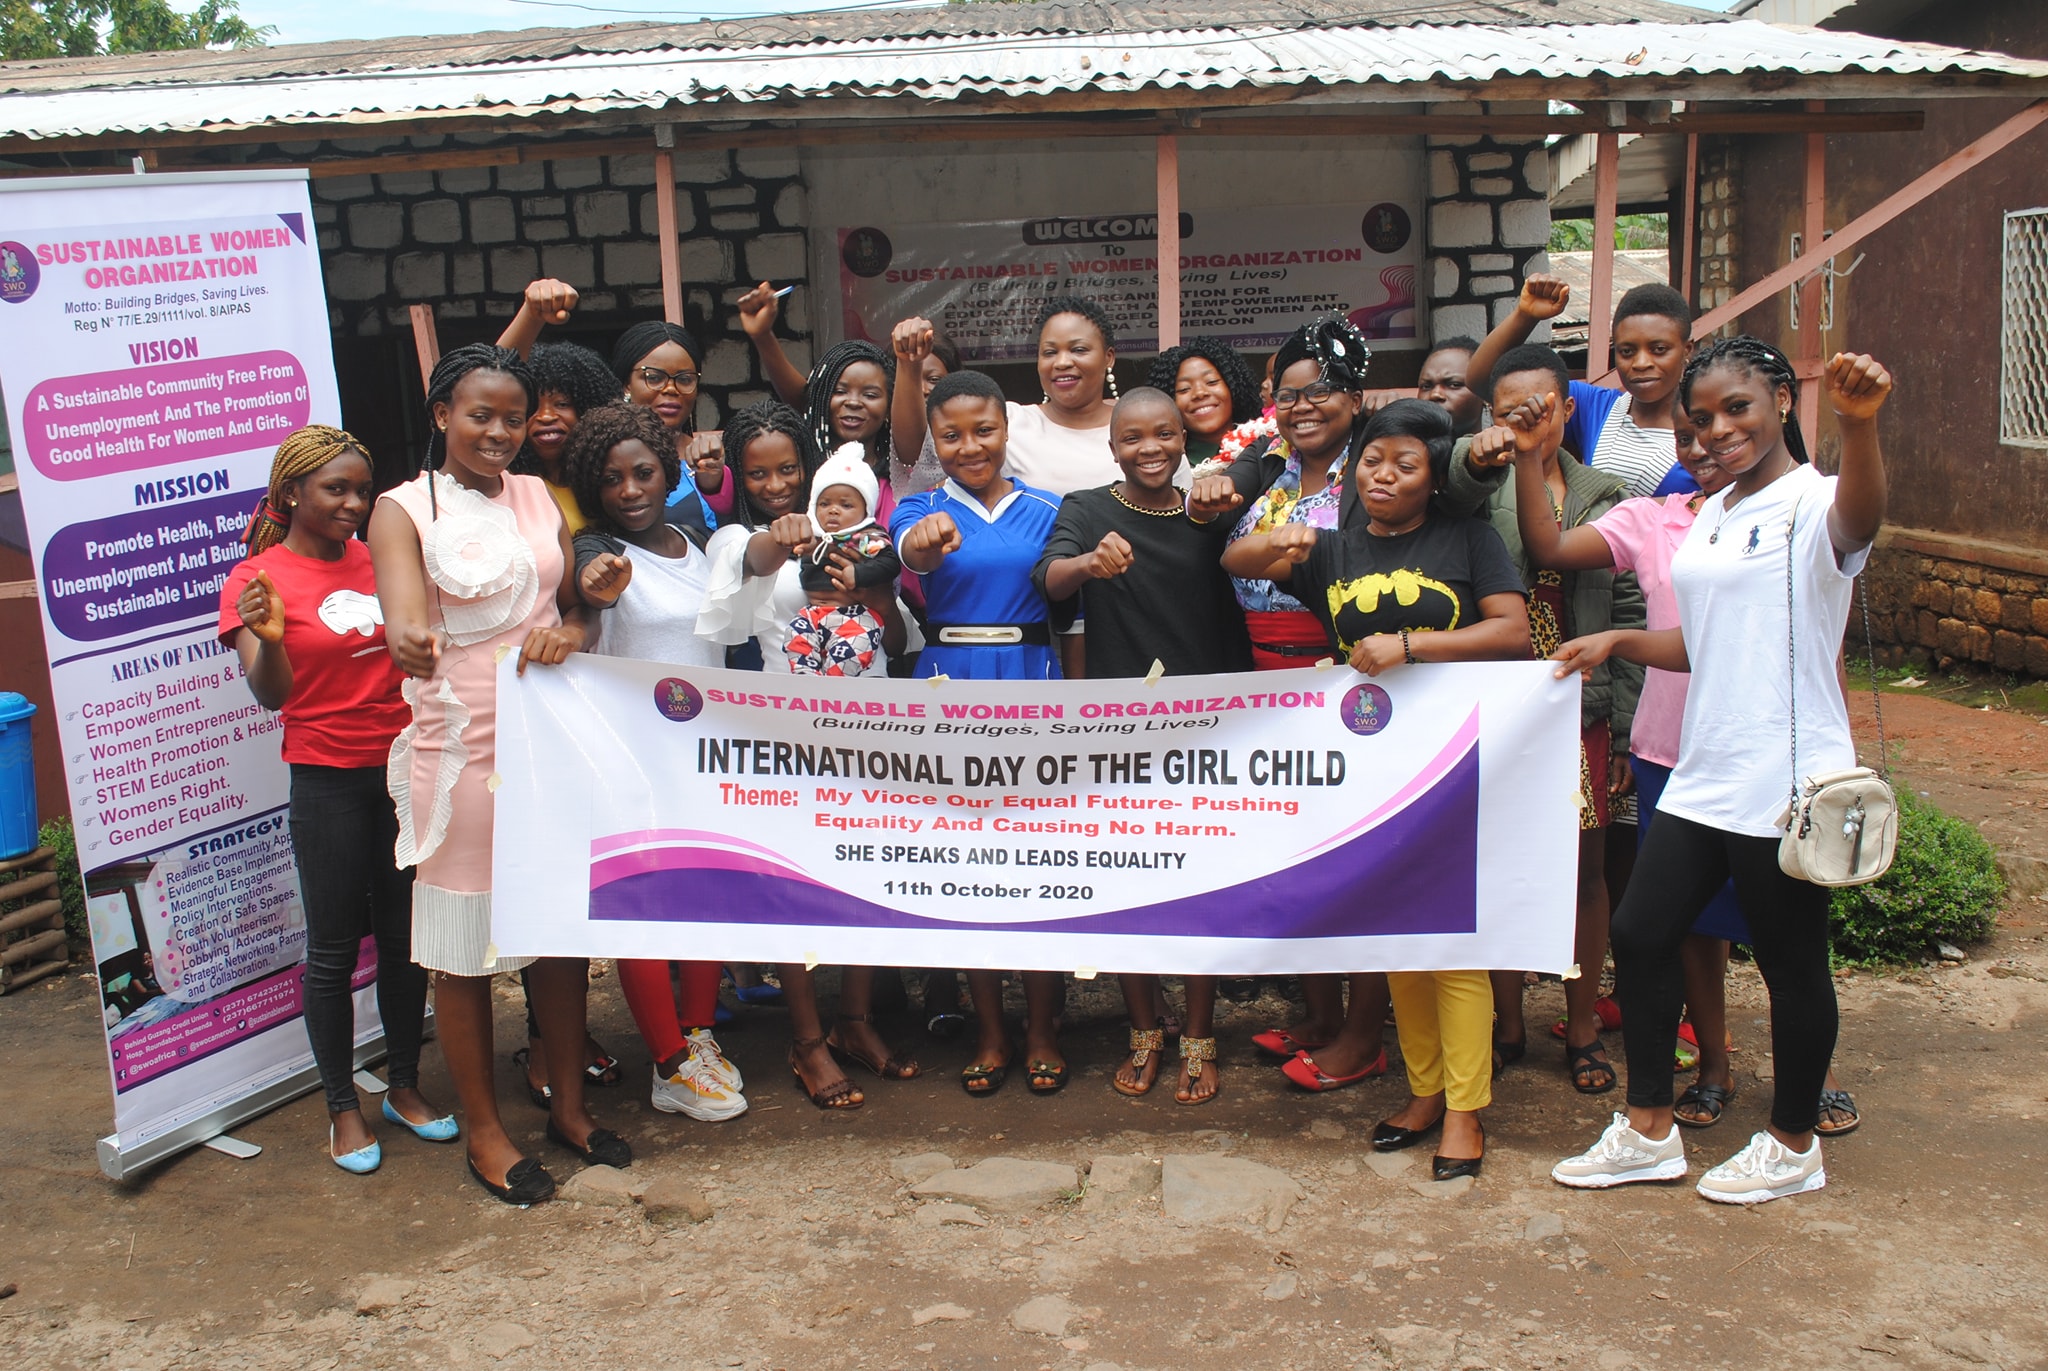 BeLA celebrated the 2020 International Day of the Girl Child with young girls